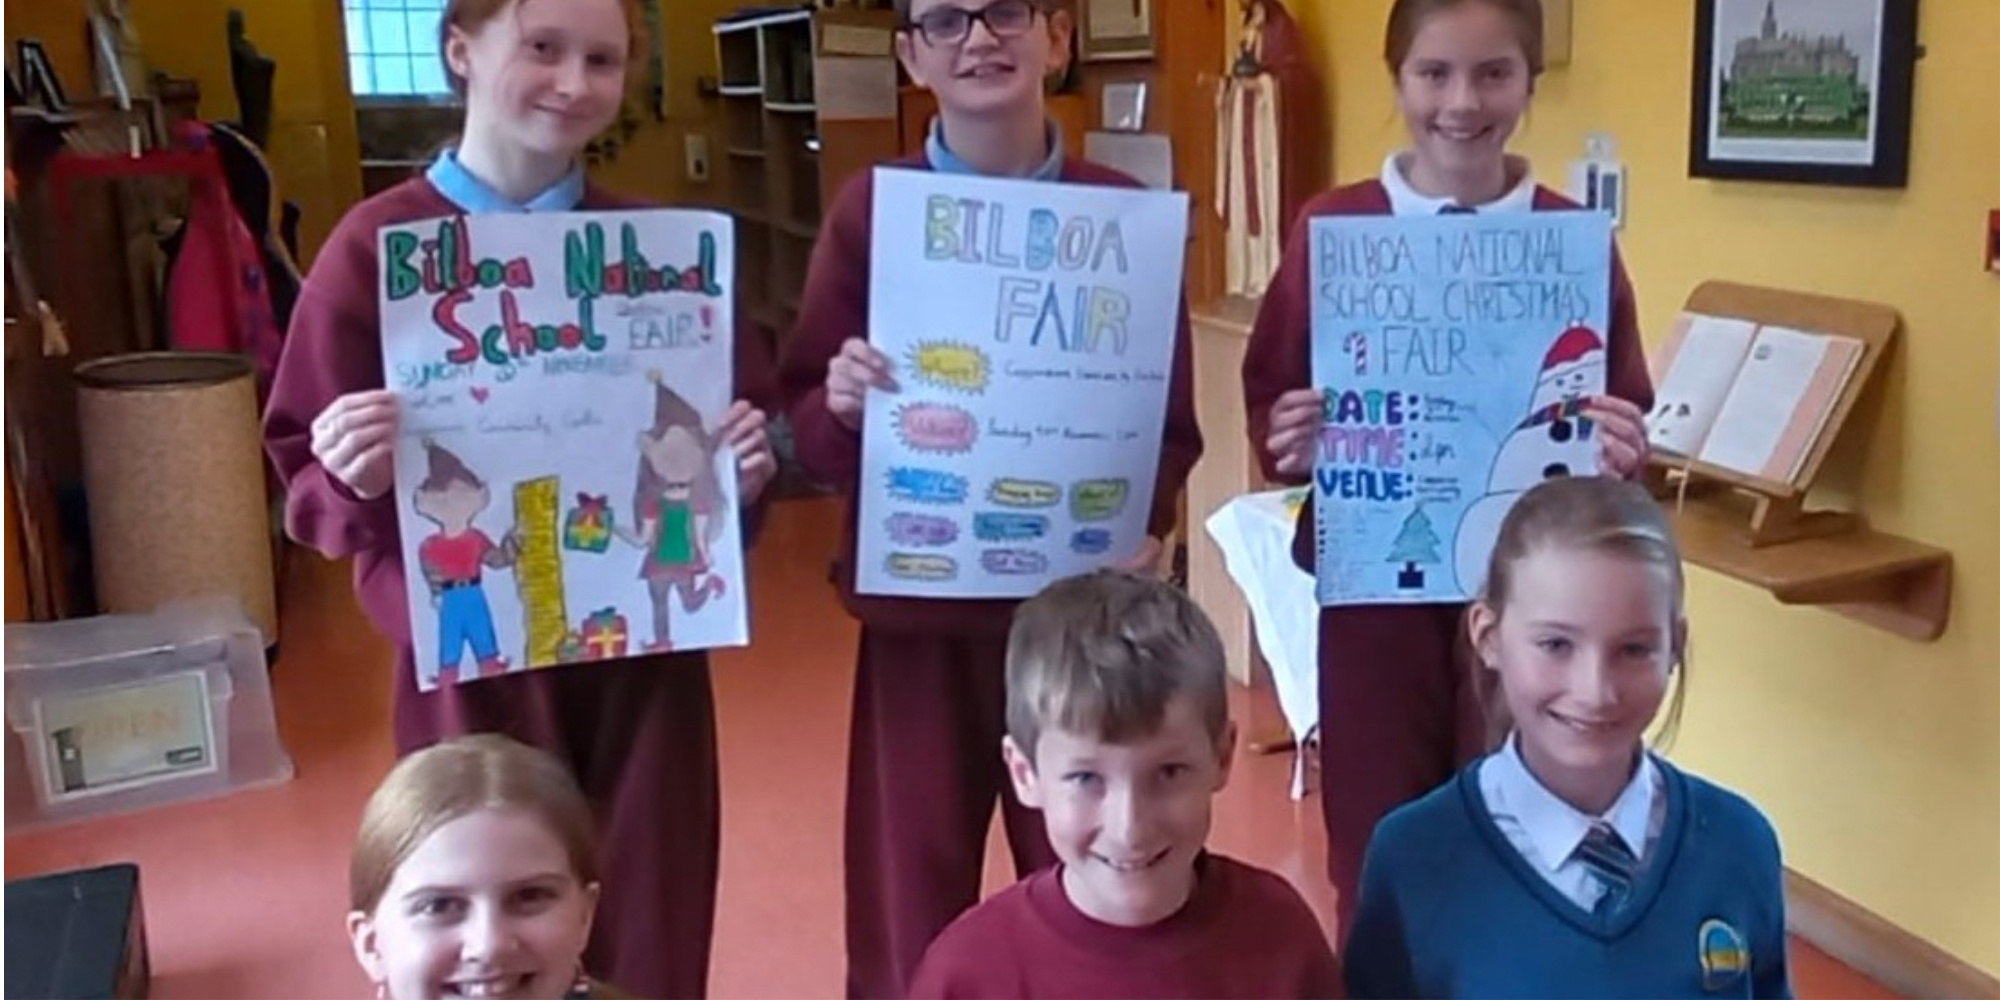 Bilboa National School Christmas Fair back in Cappamore after 2 years